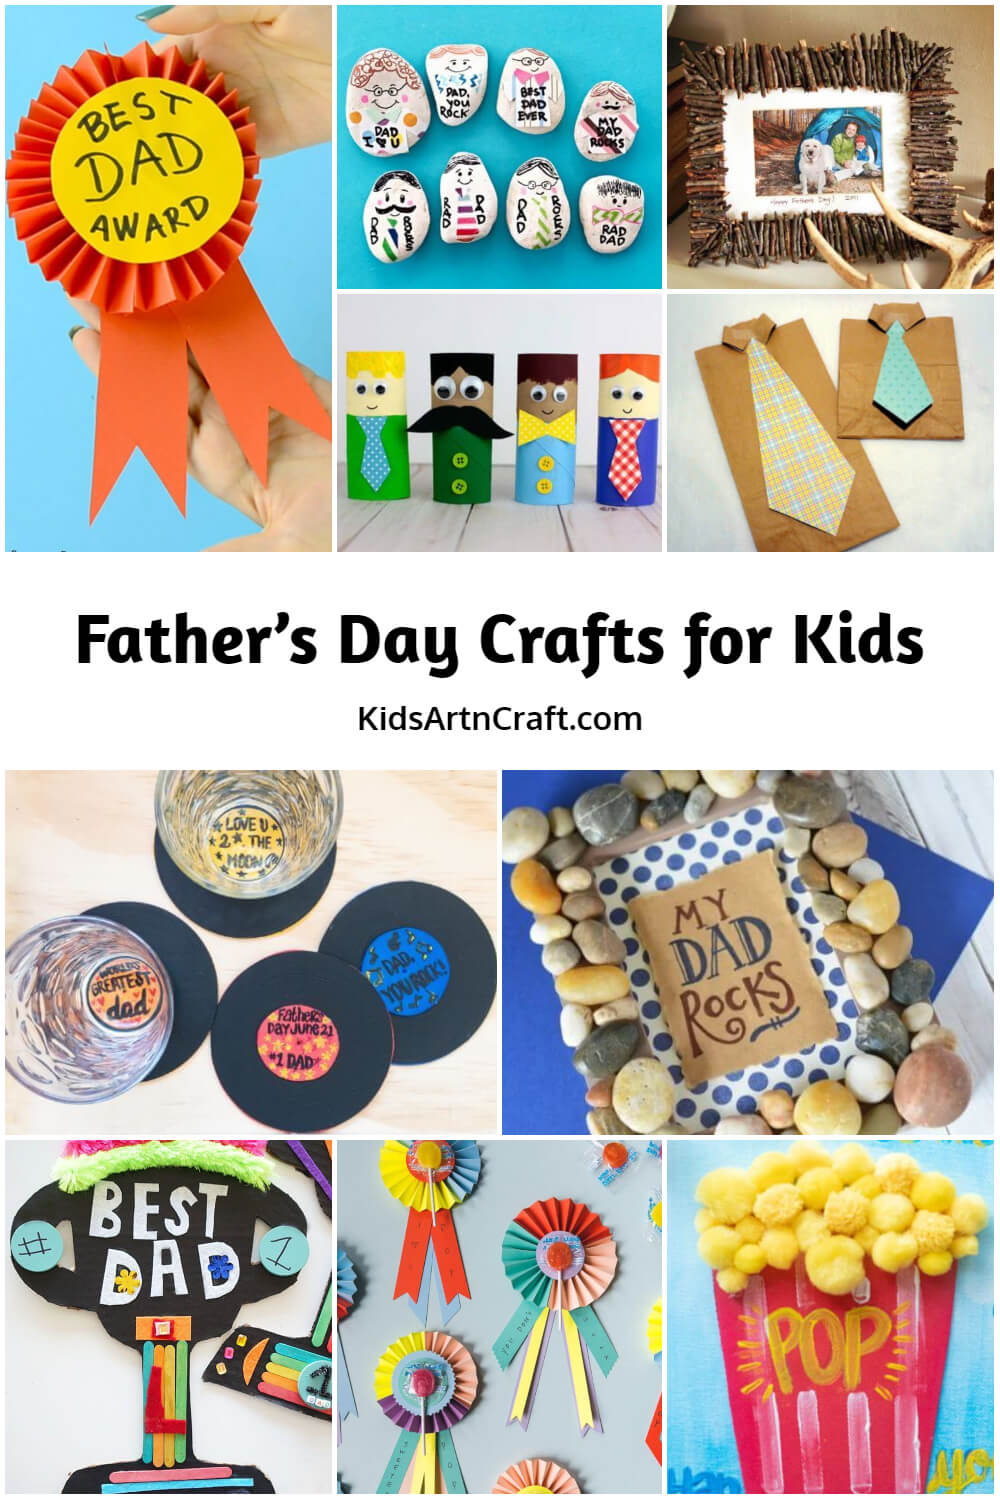 Father’s Day Crafts for Kids